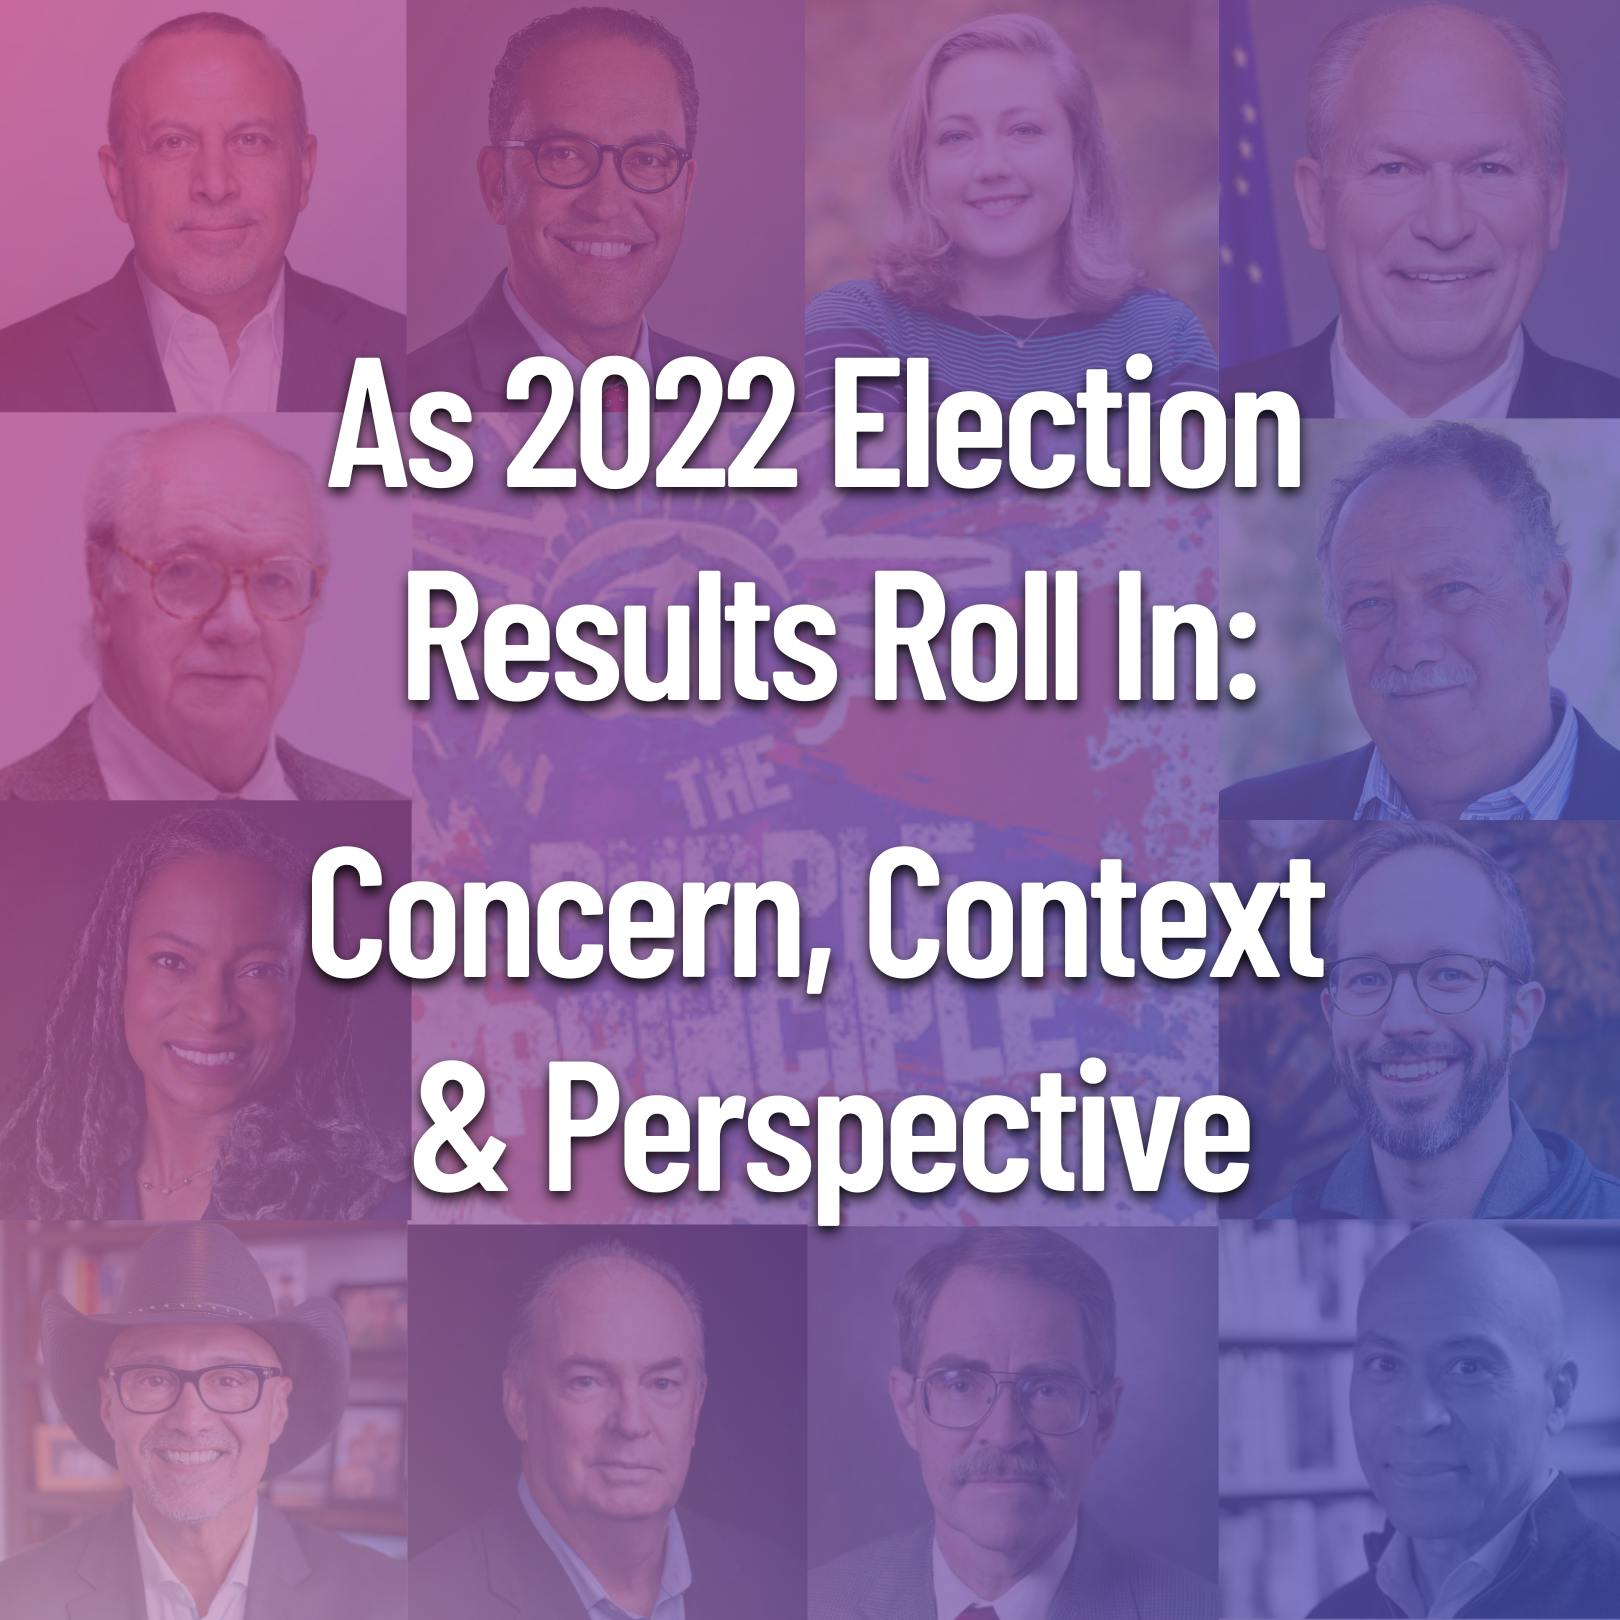 As 2022 Election Results Roll In: Concern, Context, & Perspective